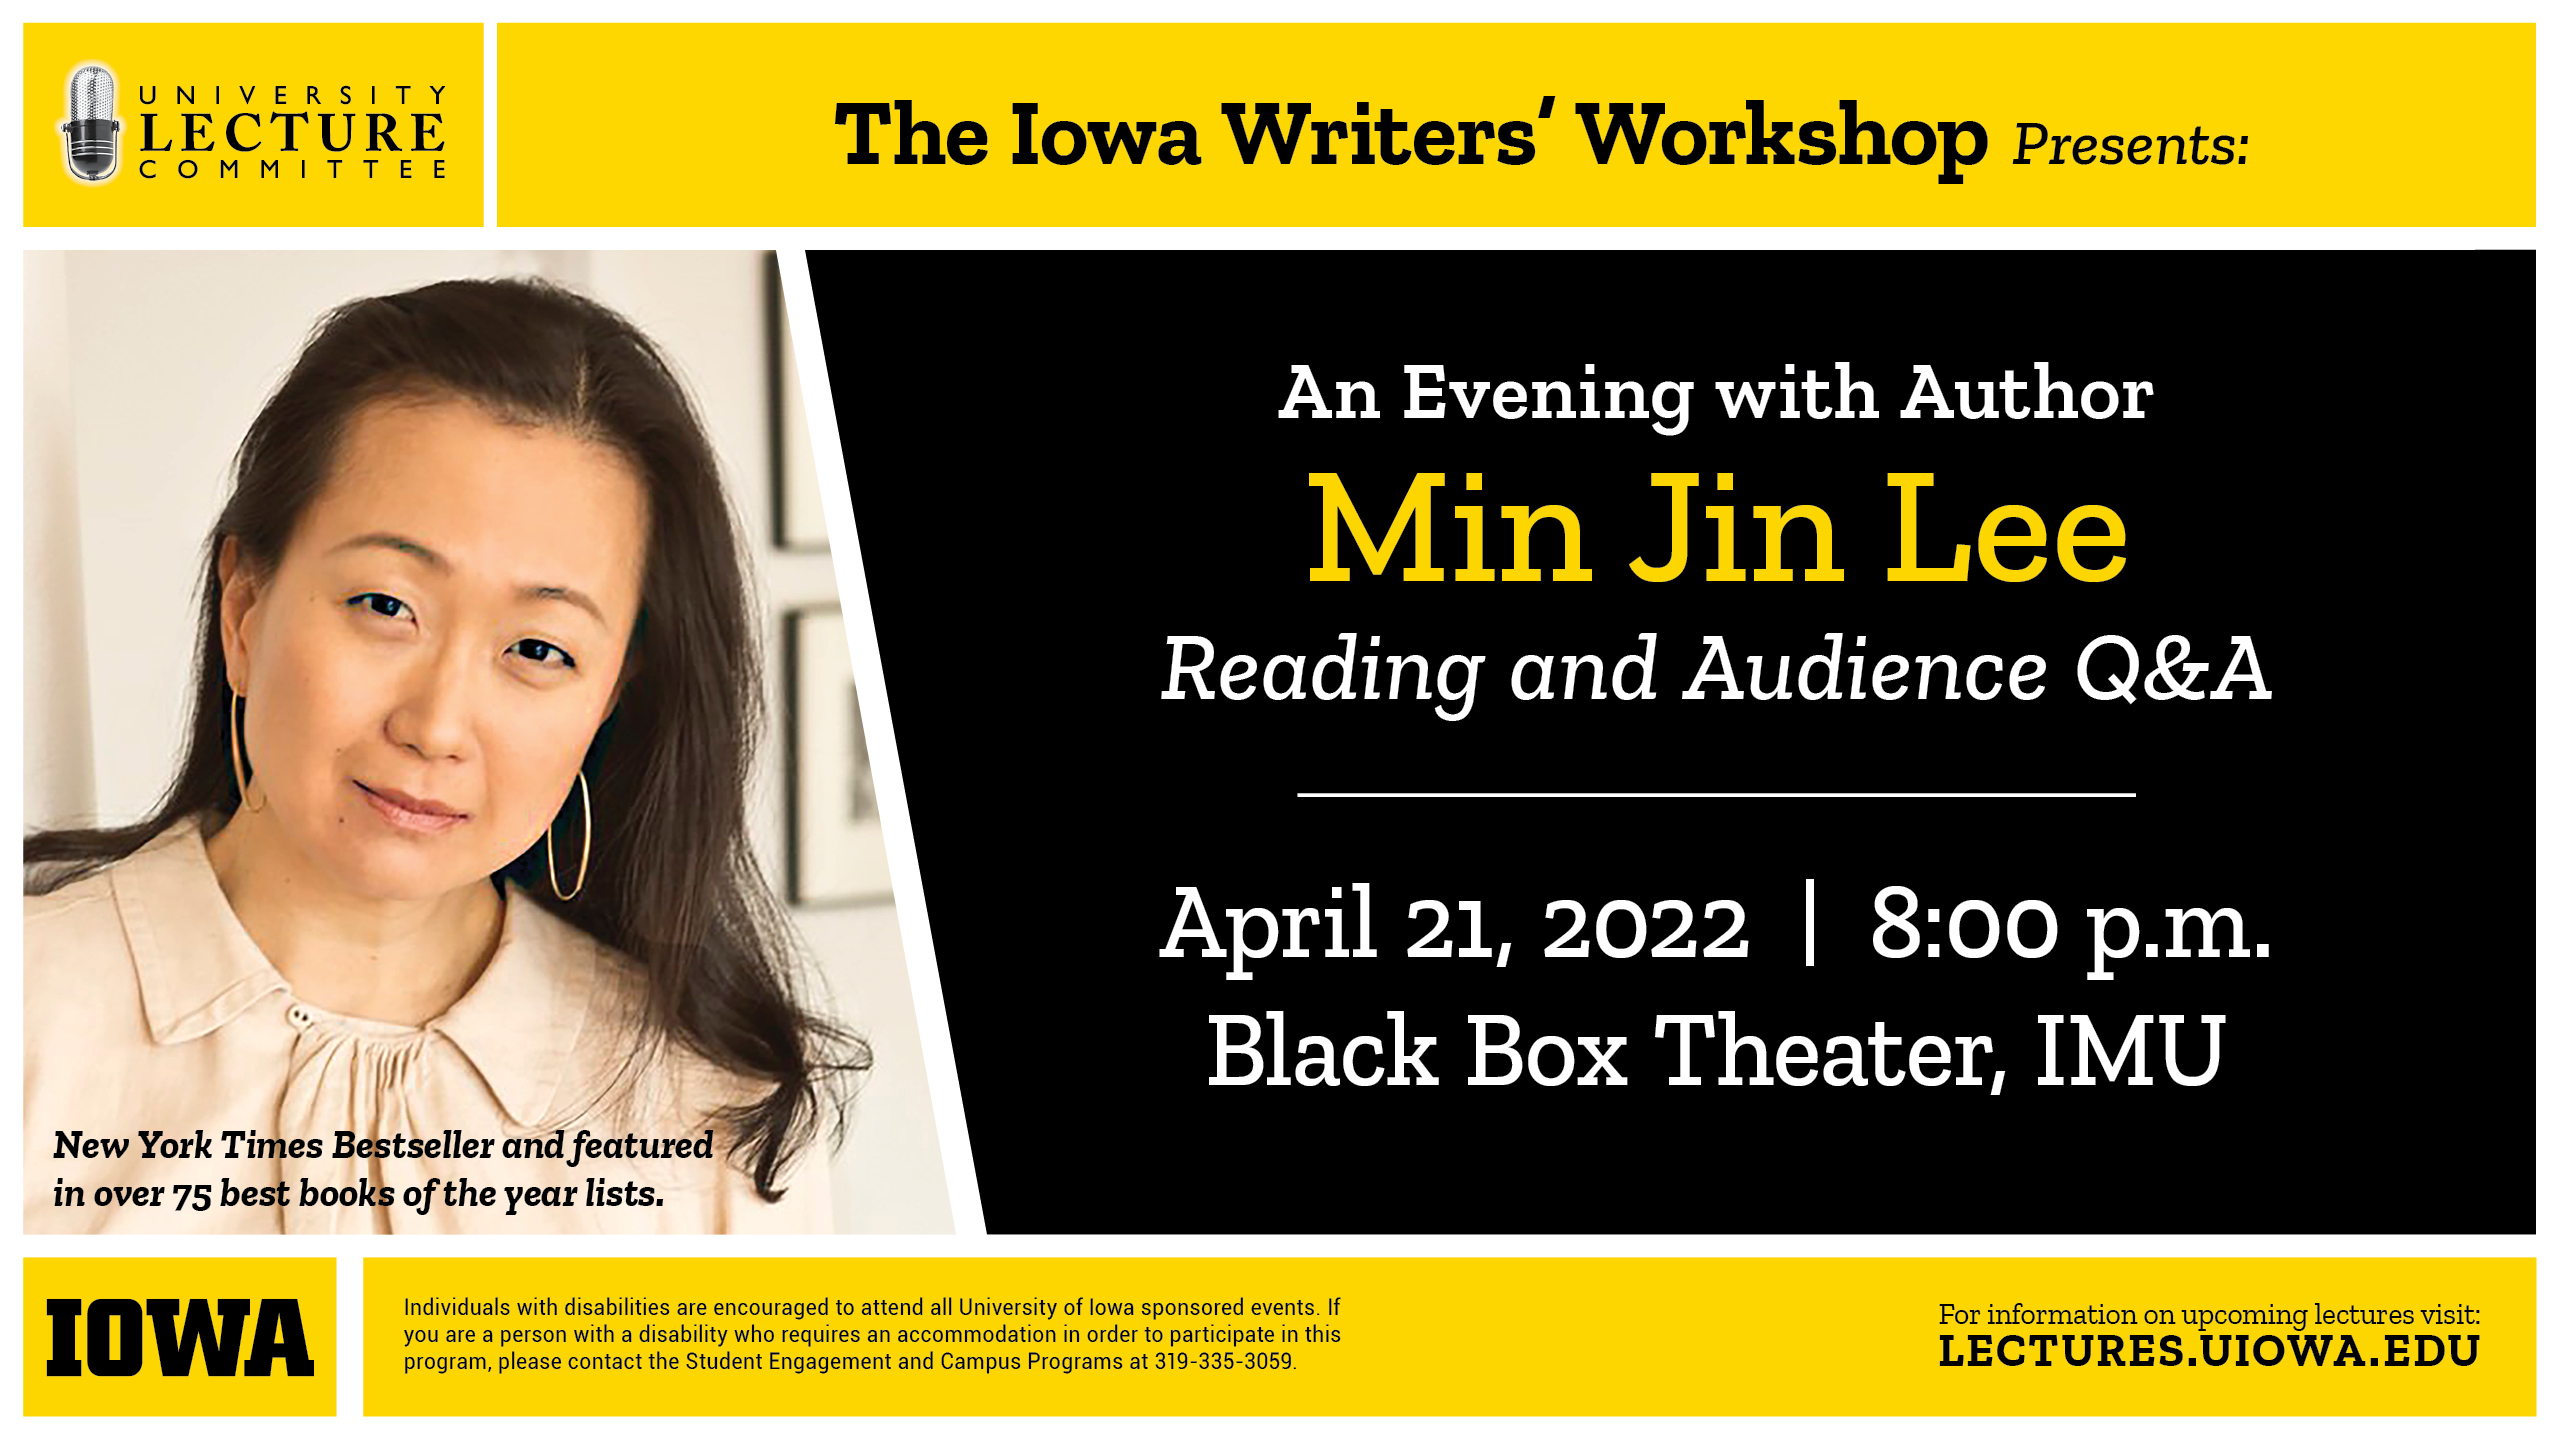 University Lecture Committee; The Iowa Writers' Workshop Presents: An Evening with Author Min Jin Lee; Reading and Audience Q&A; April 21, 2022; 8:00 p.m.; Black Box Theater, IMU